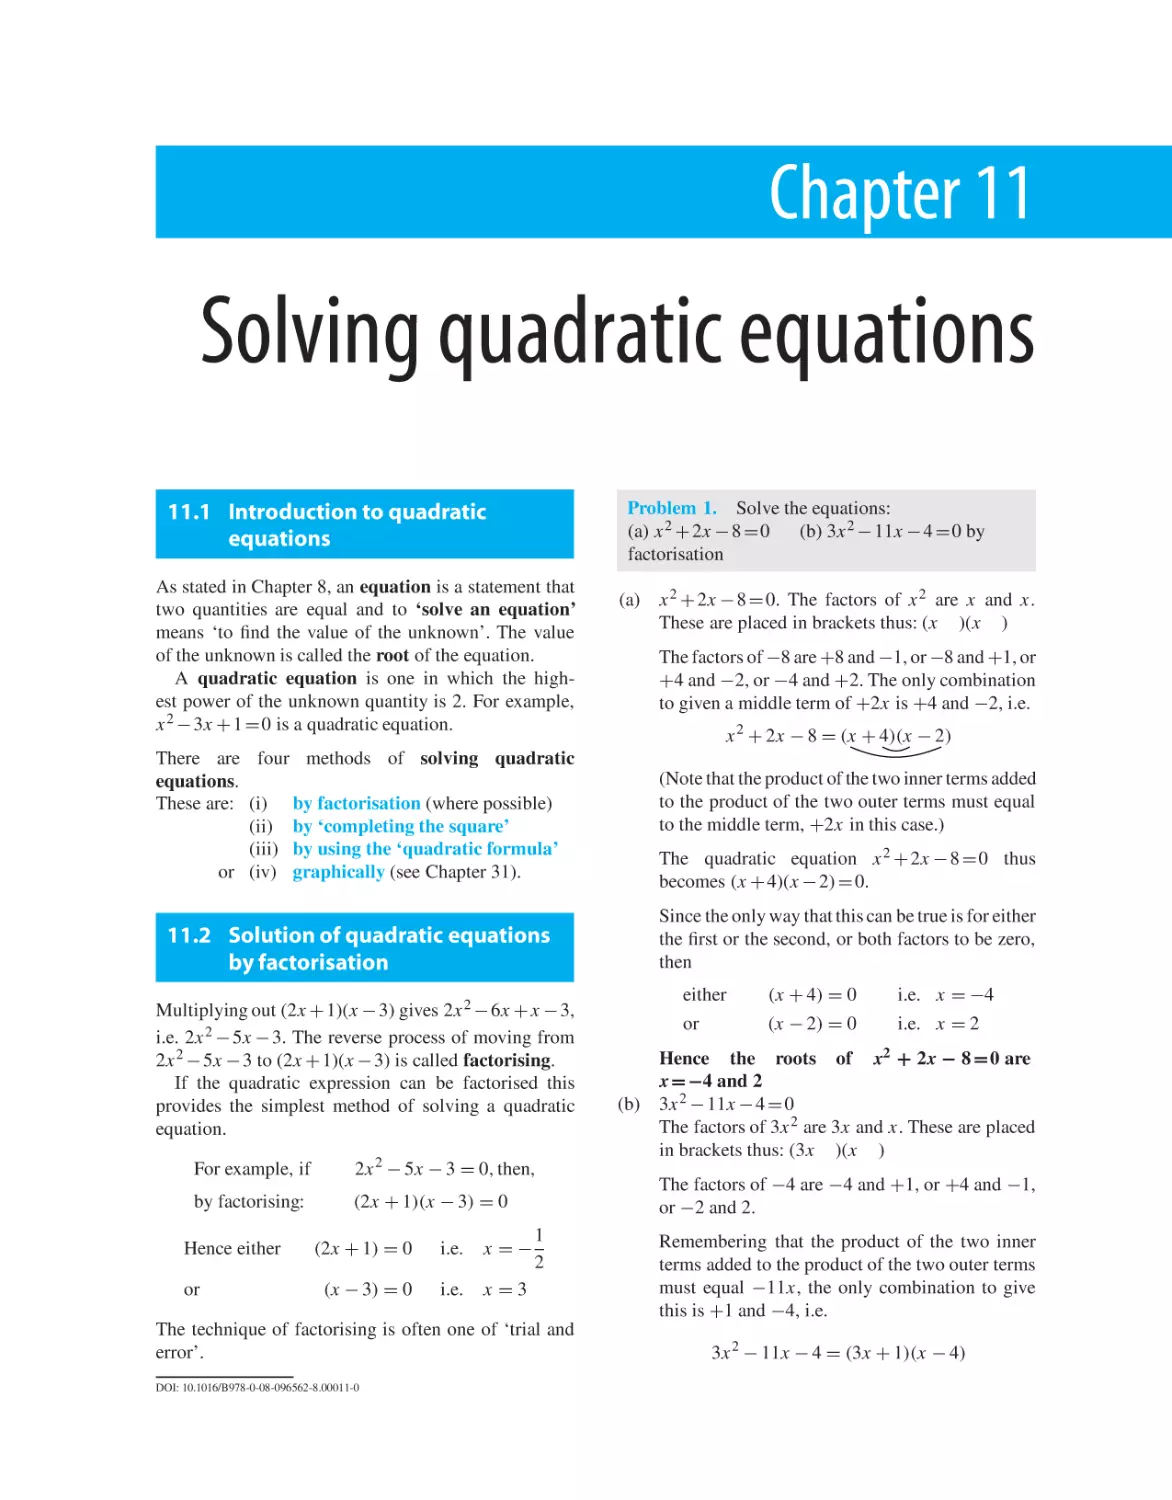 Chapter 11. Solving quadratic equations
11.1 Introduction to quadratic equations
11.2 Solution of quadratic equations by factorisation